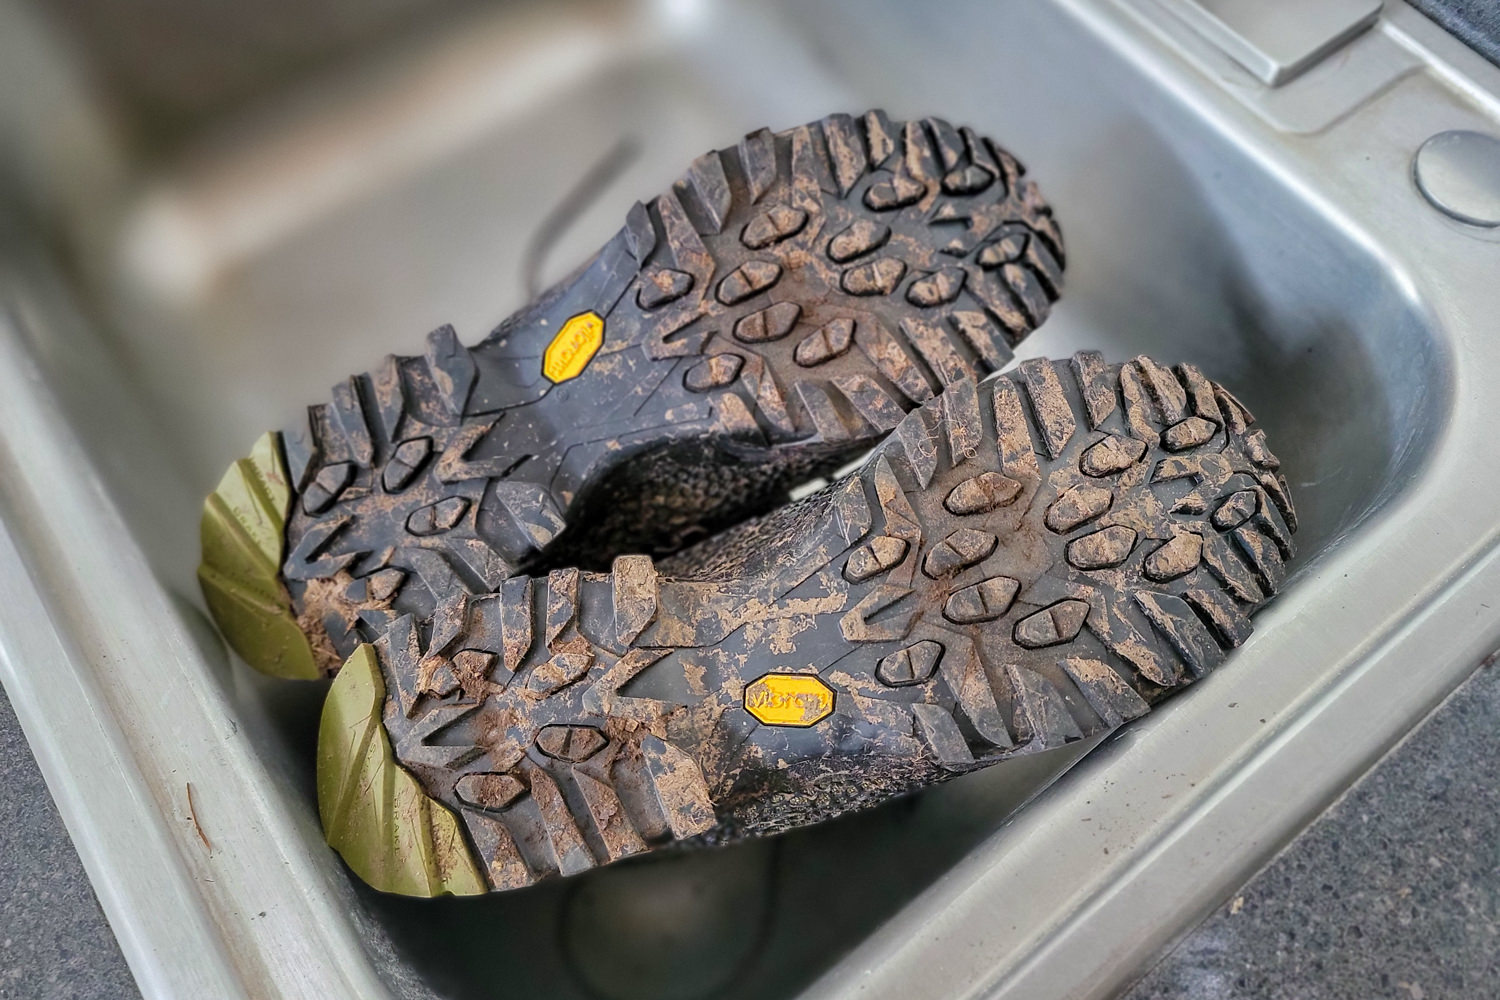 Closeup of the dirty soles of the La Sportiva Nucleo High II GTX hiking boots in a sink